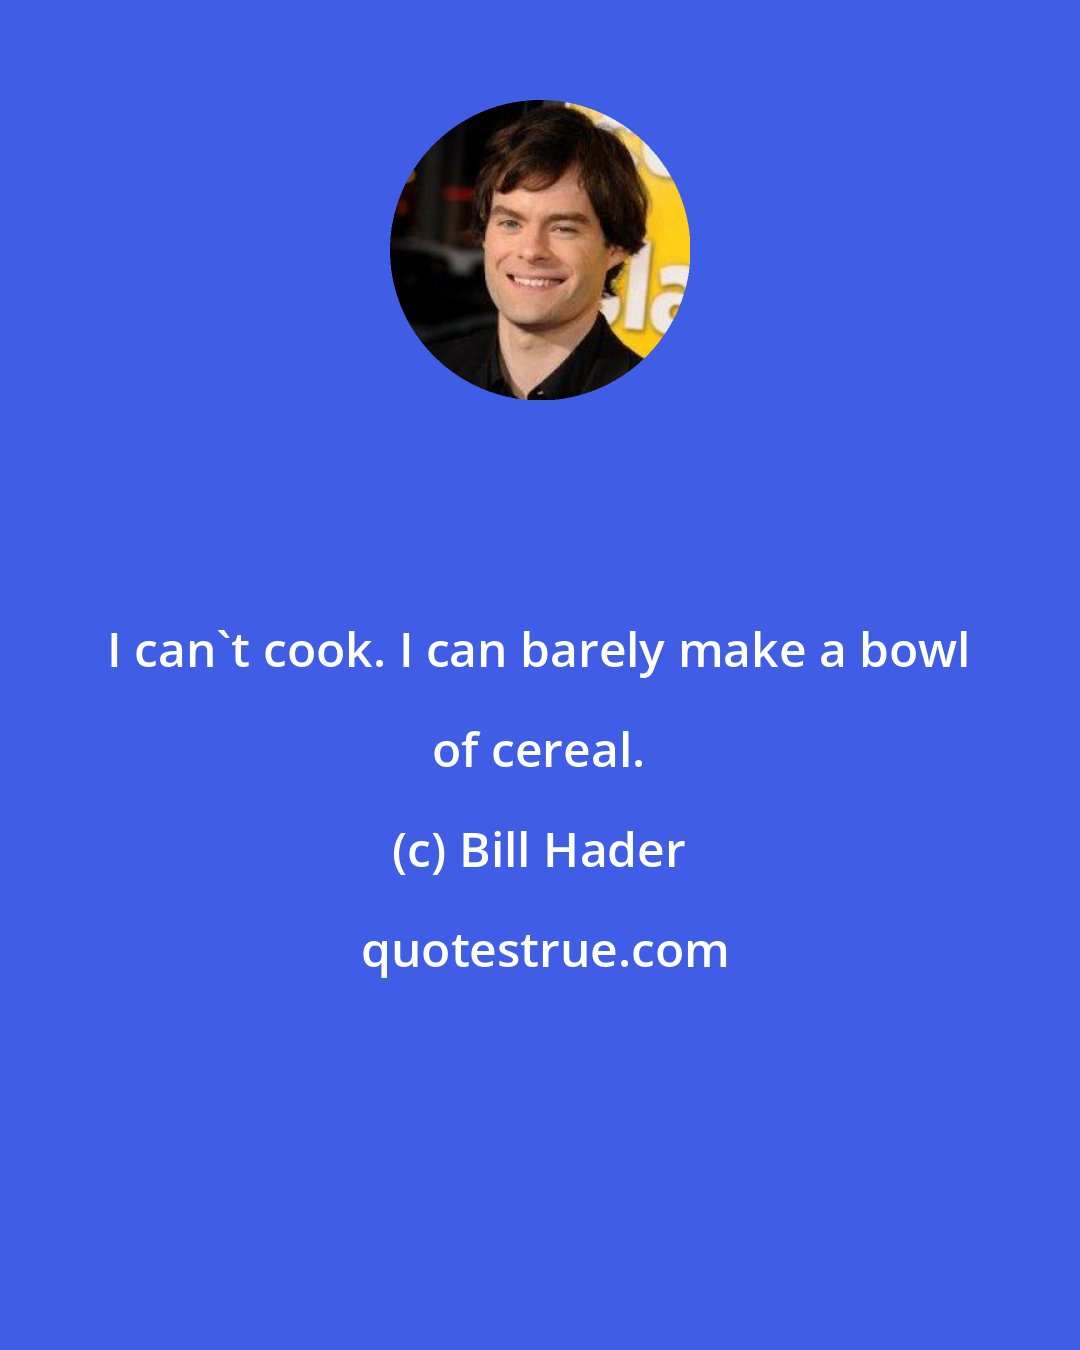 Bill Hader: I can't cook. I can barely make a bowl of cereal.